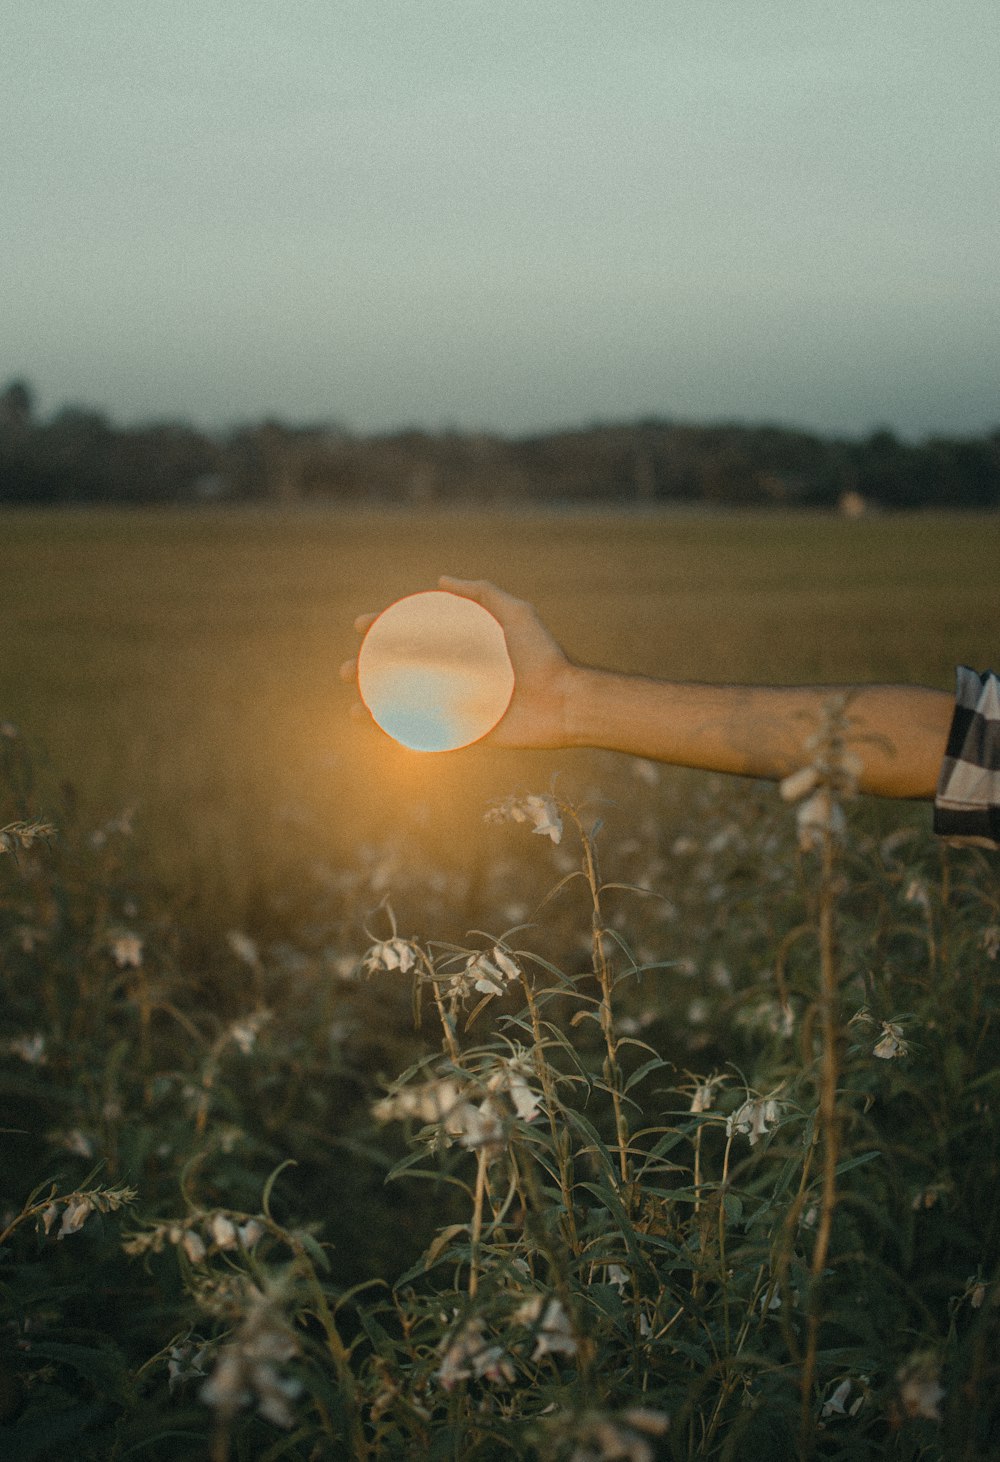 a person's hand holding a light in a field